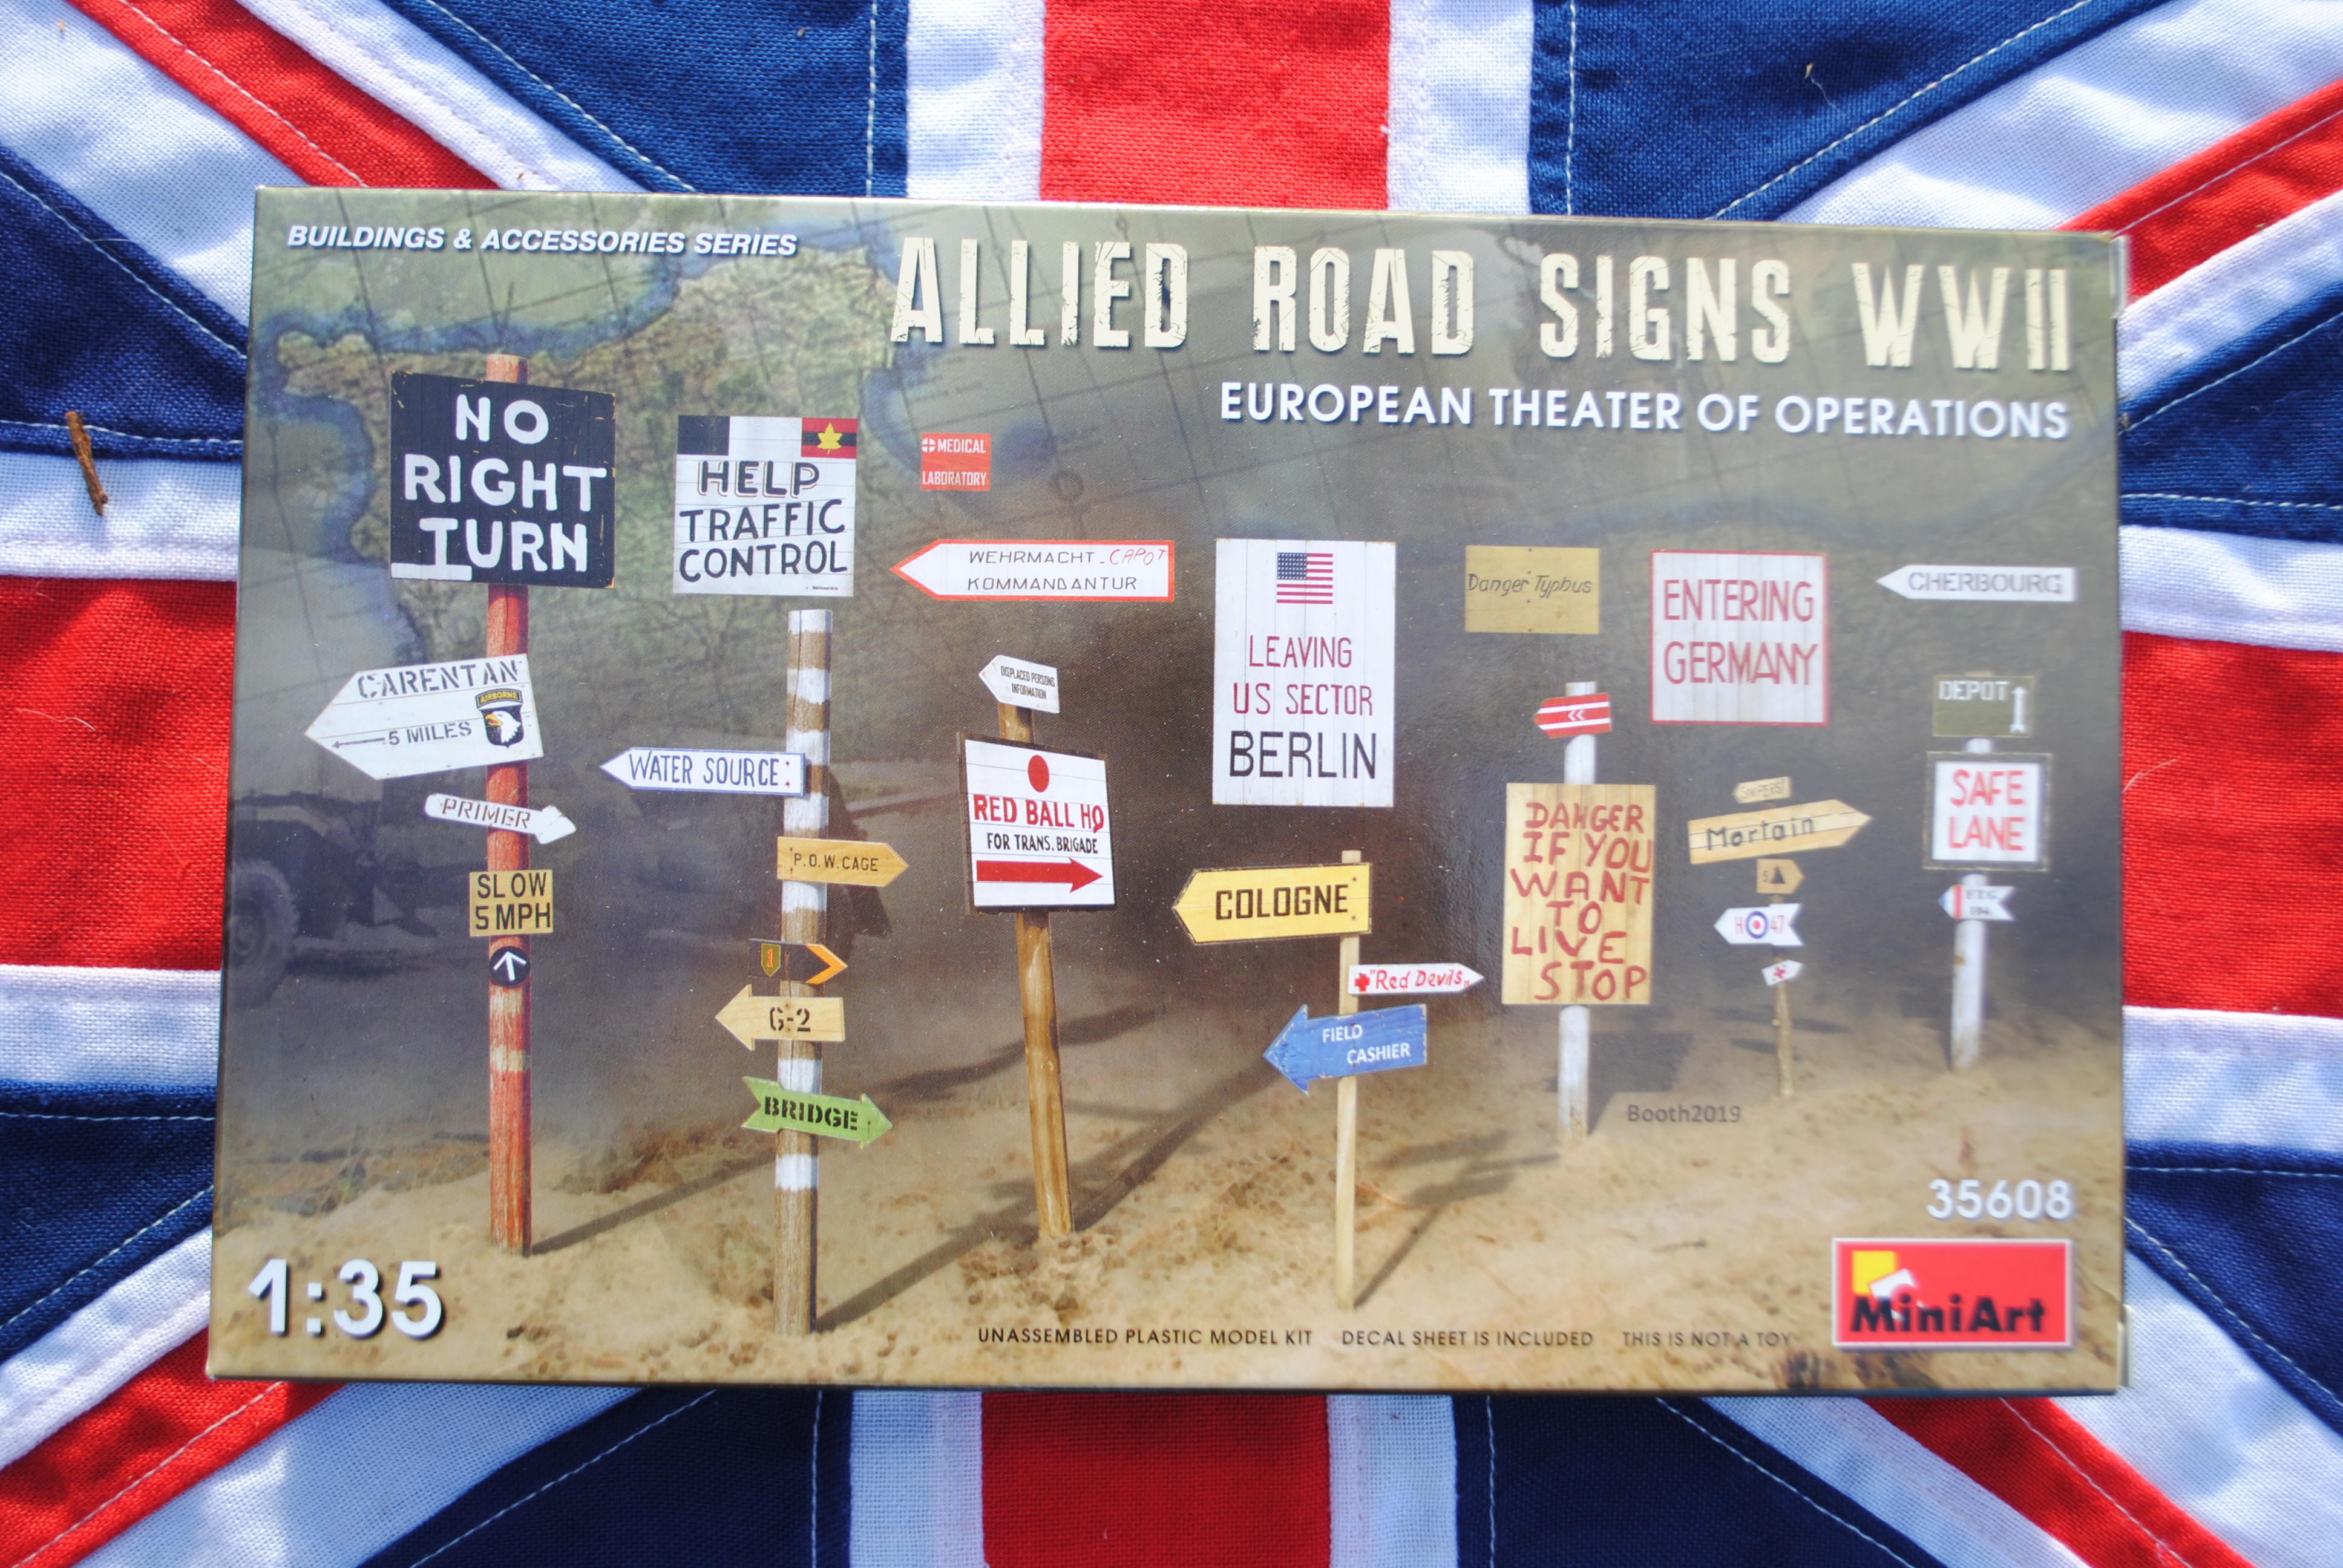 Mini Art 35608 ALLIED ROAD SIGNS WWII. EUROPEAN THEATRE OF OPERATIONS